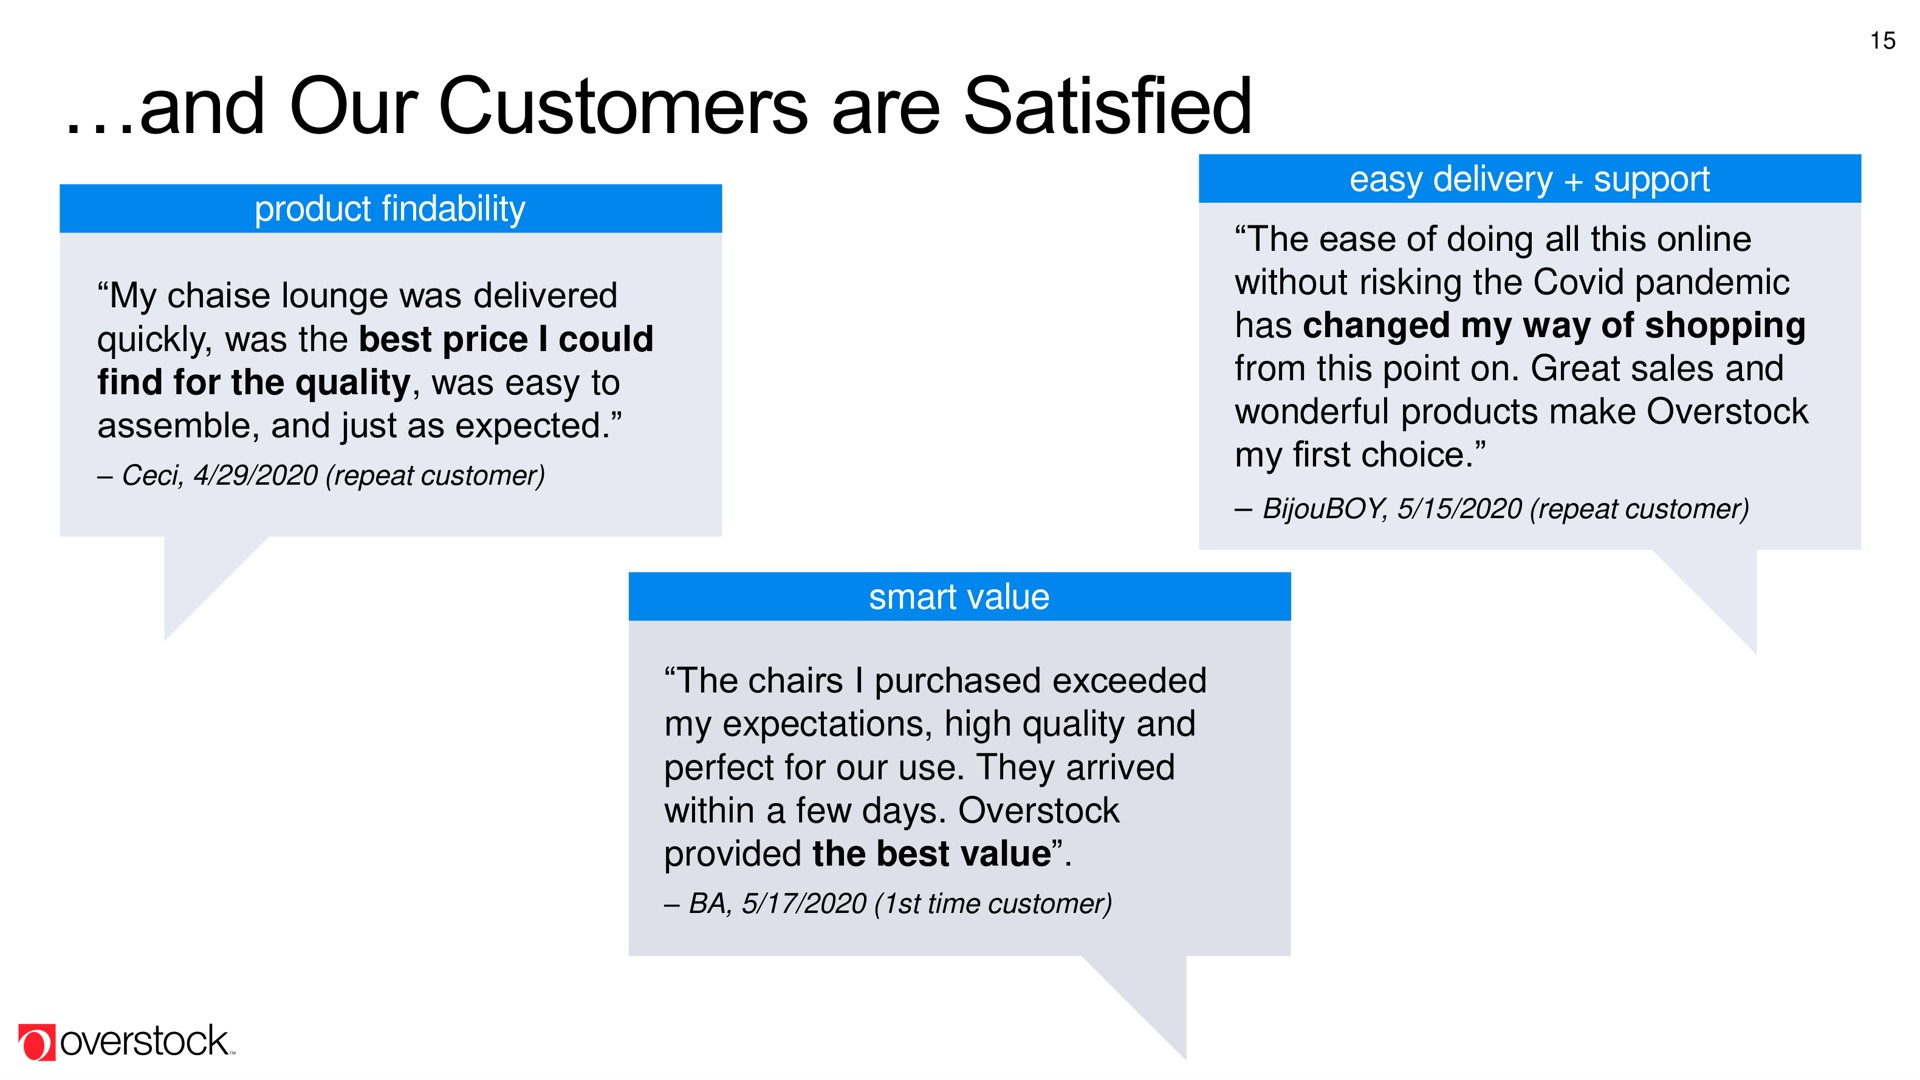 and our customers are satisfied | Overstock